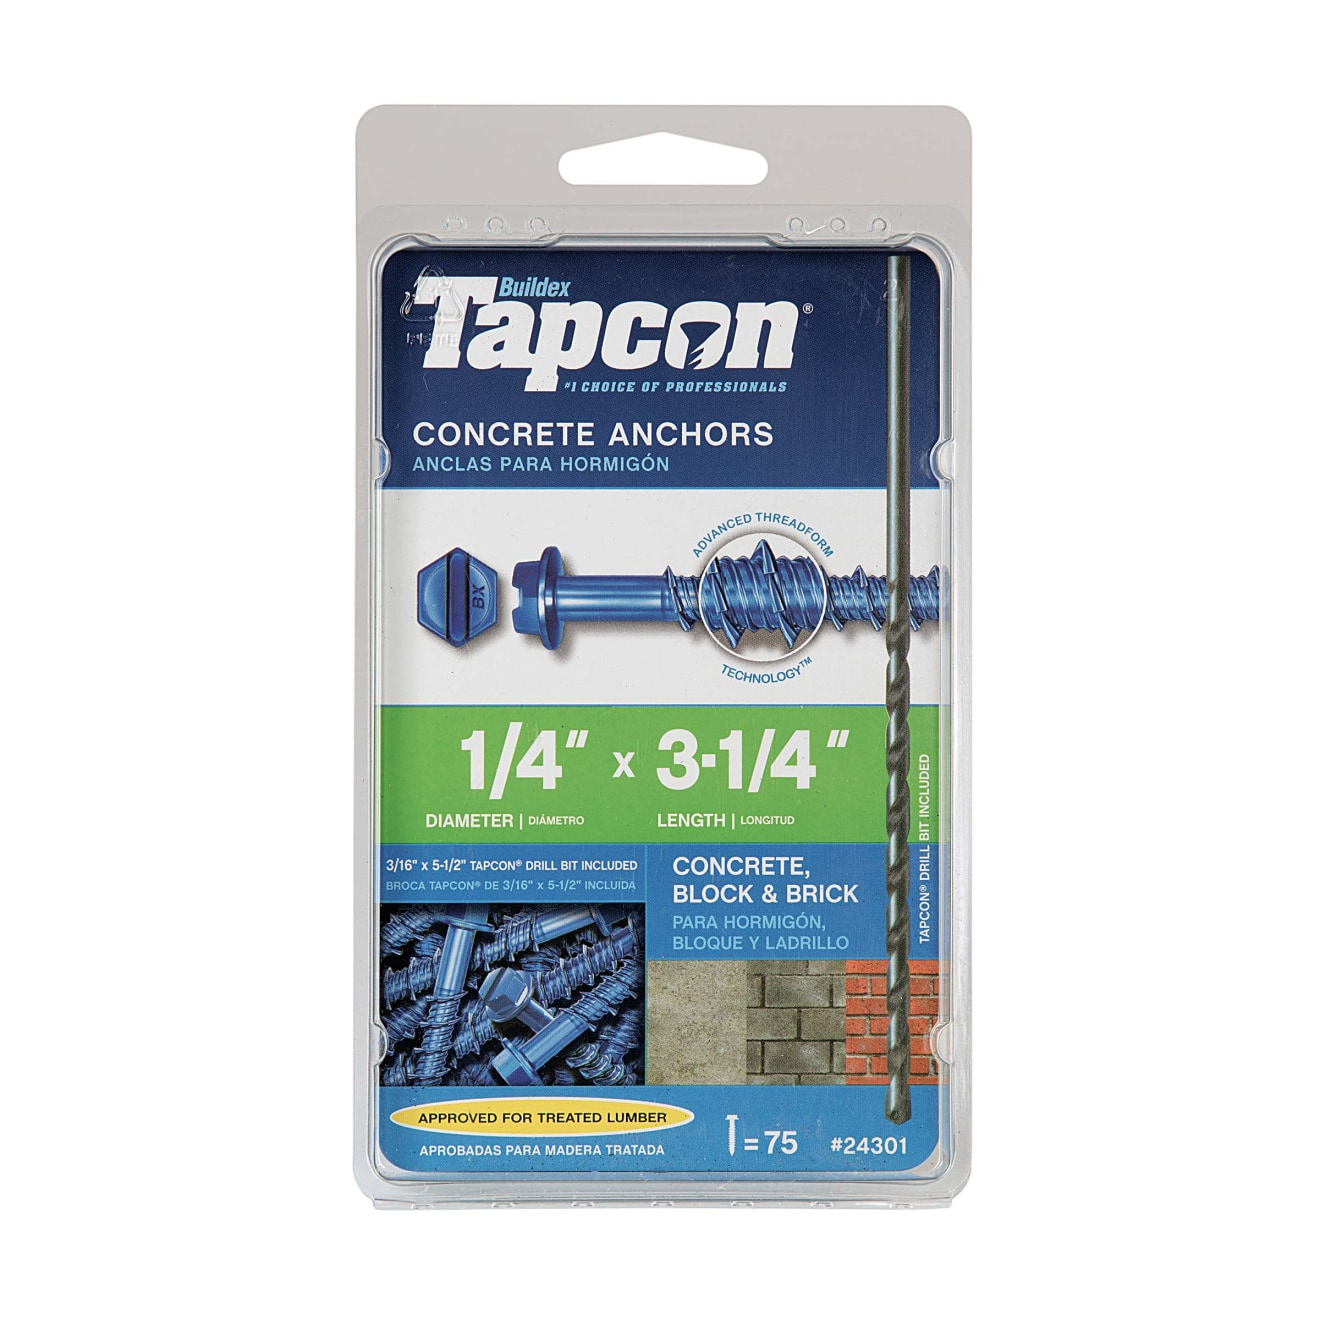 200g OF 'MIXED IN THE PACK' BLUE CSK SELF DRILLING TAPPING SCREWS MASONRY TAPCON 